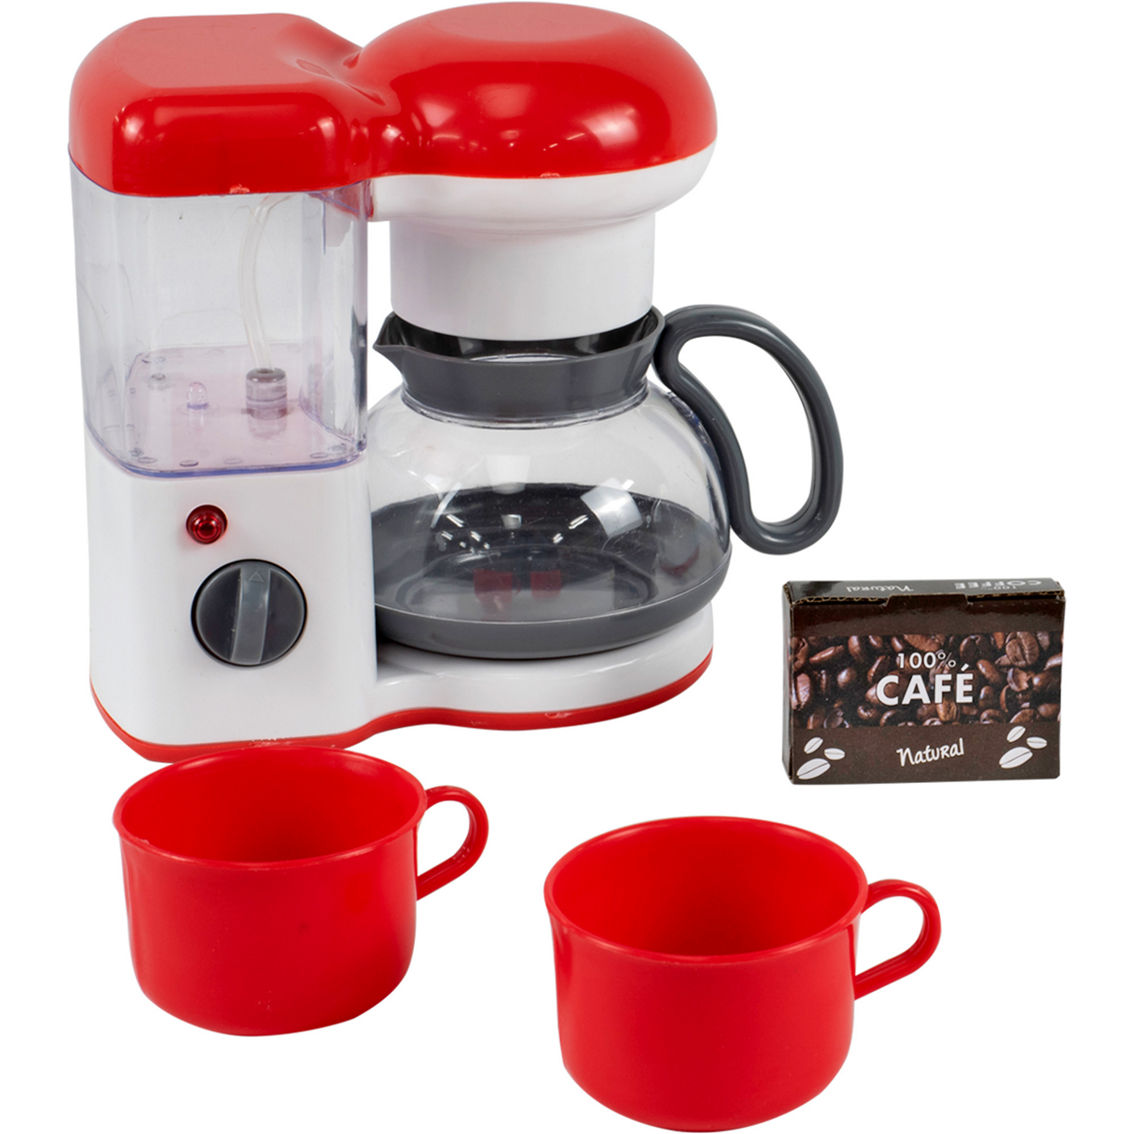 Dollar Queen Deluxe Kitchen Toaster and Coffee Maker Playset - Image 4 of 4